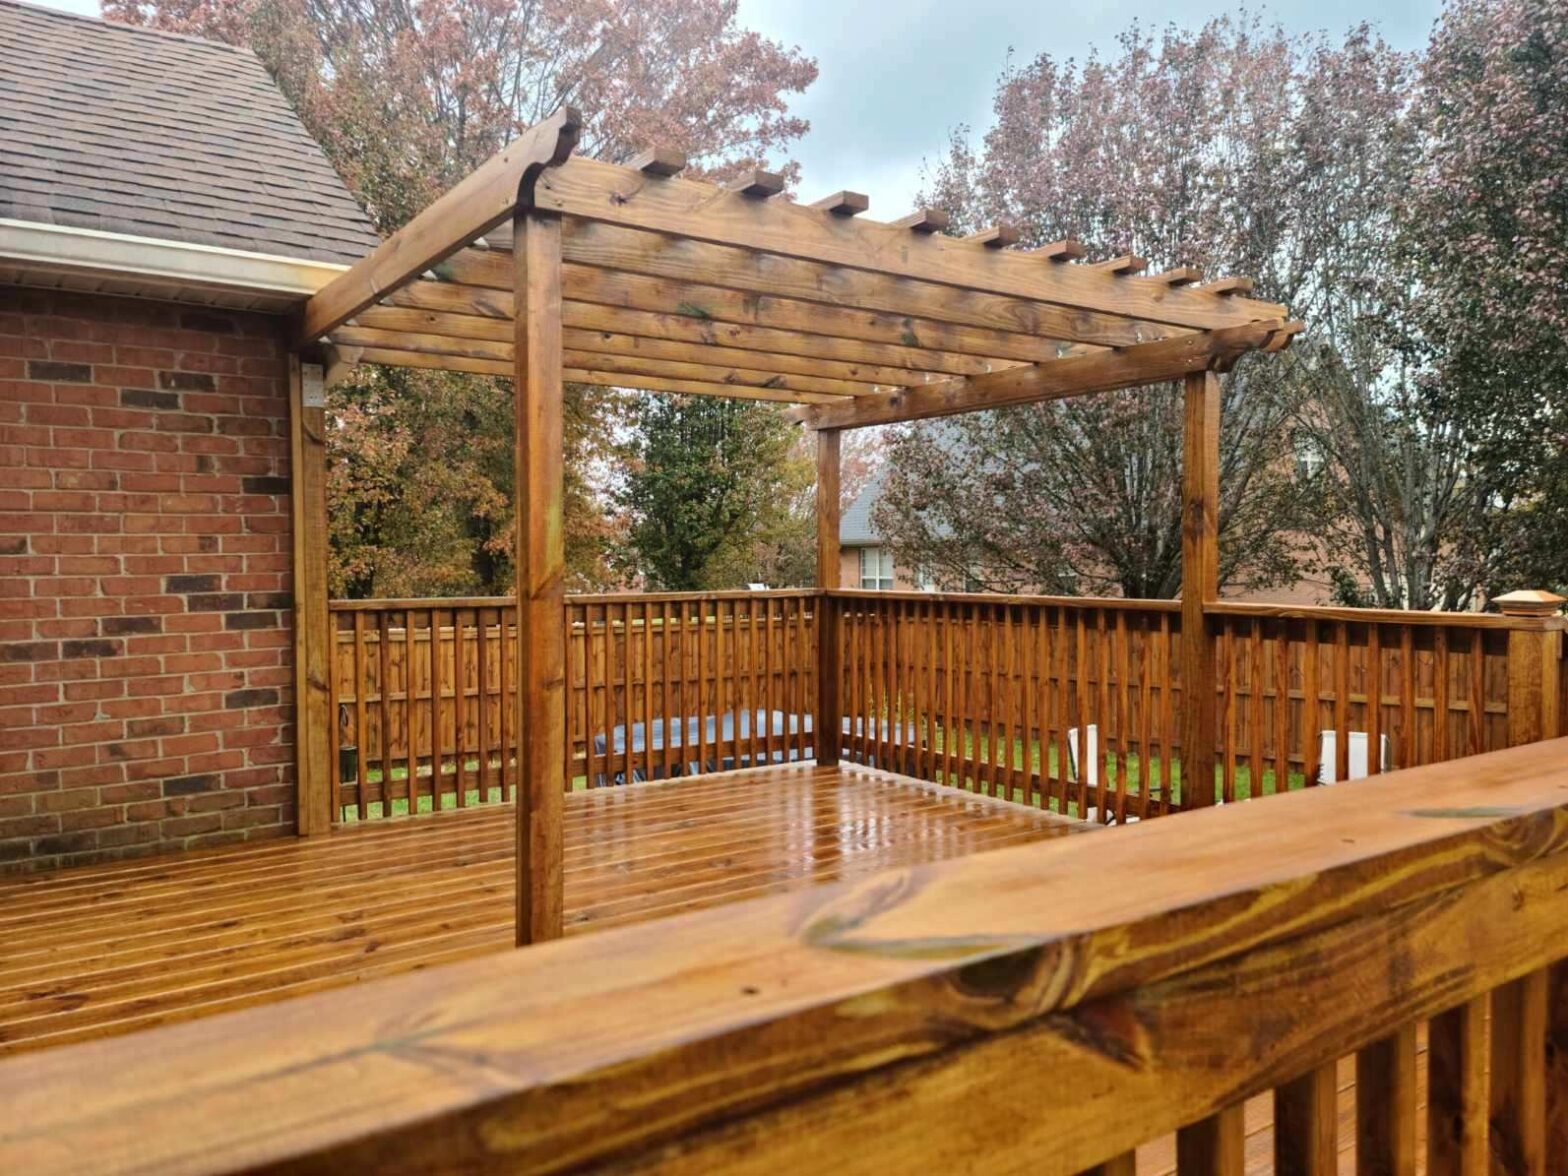 Photo of a Tennessee wood deck finishing company